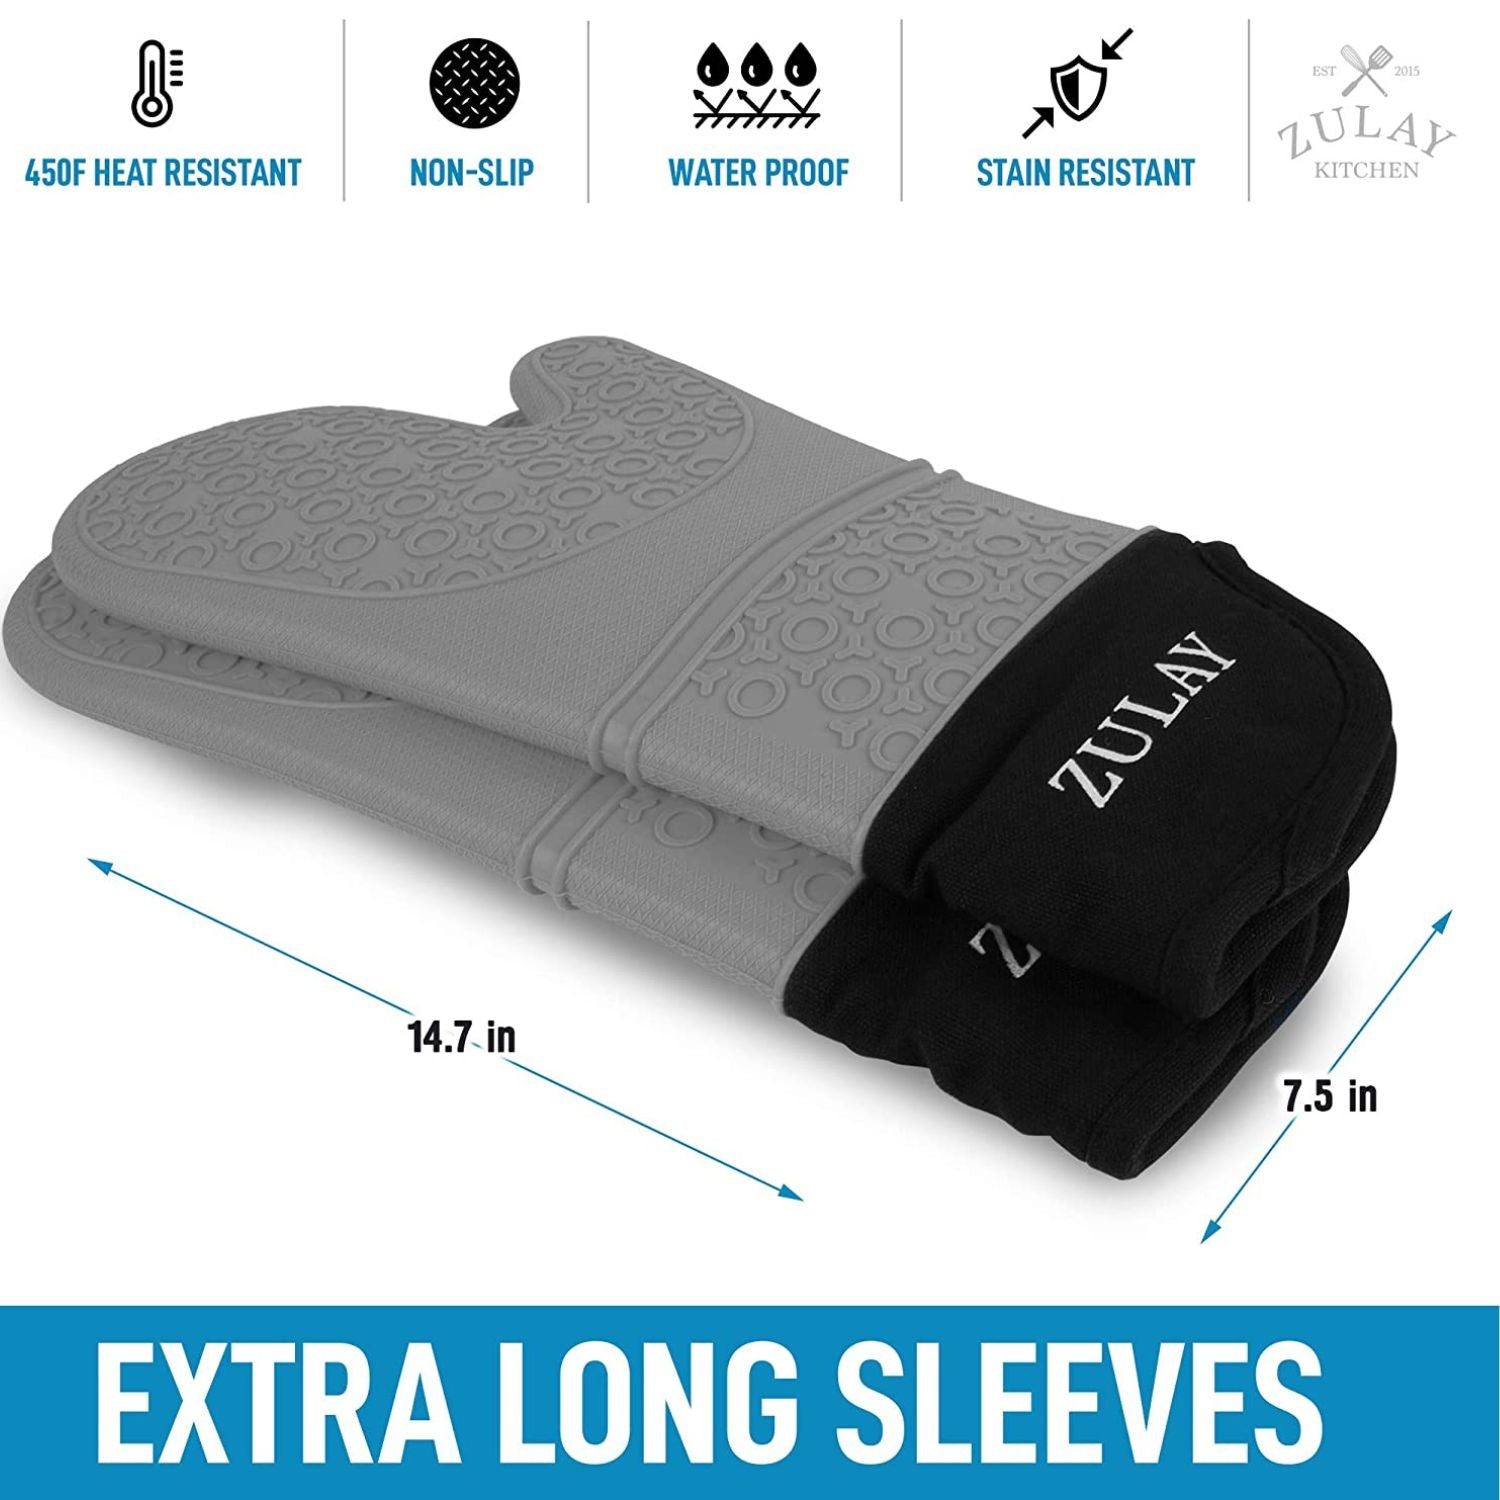 Zulay Kitchen Extra Long Sleeves Silicone Oven Mitts